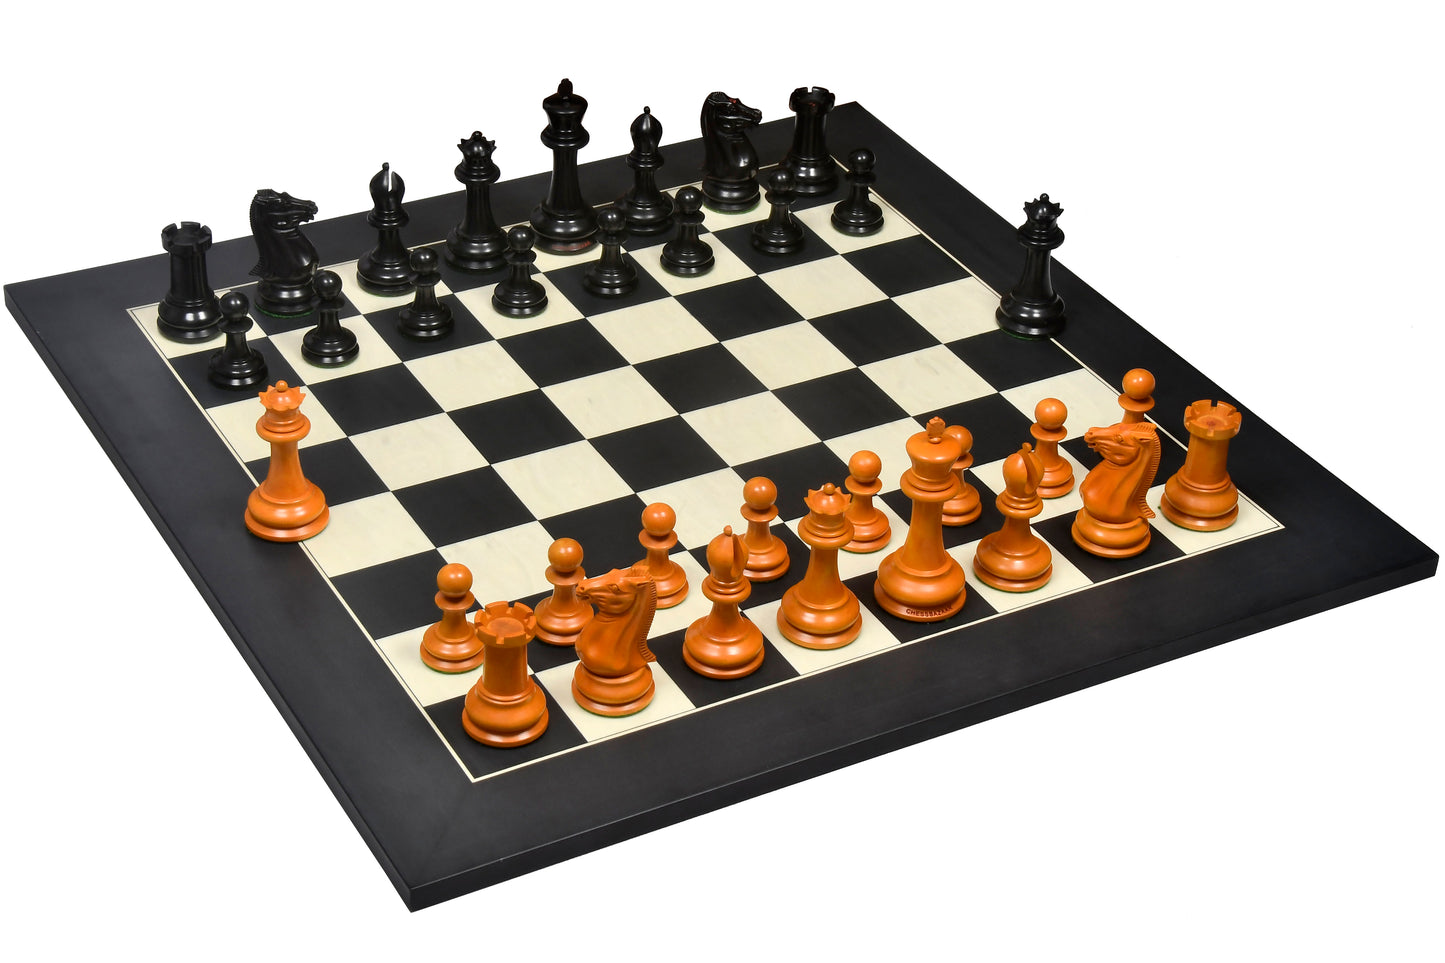 Reproduced 1850 Morphy Chess Pieces Only V2.0 in Ebony / Antiqued Box wood with King Side Stamping - 4.4" King